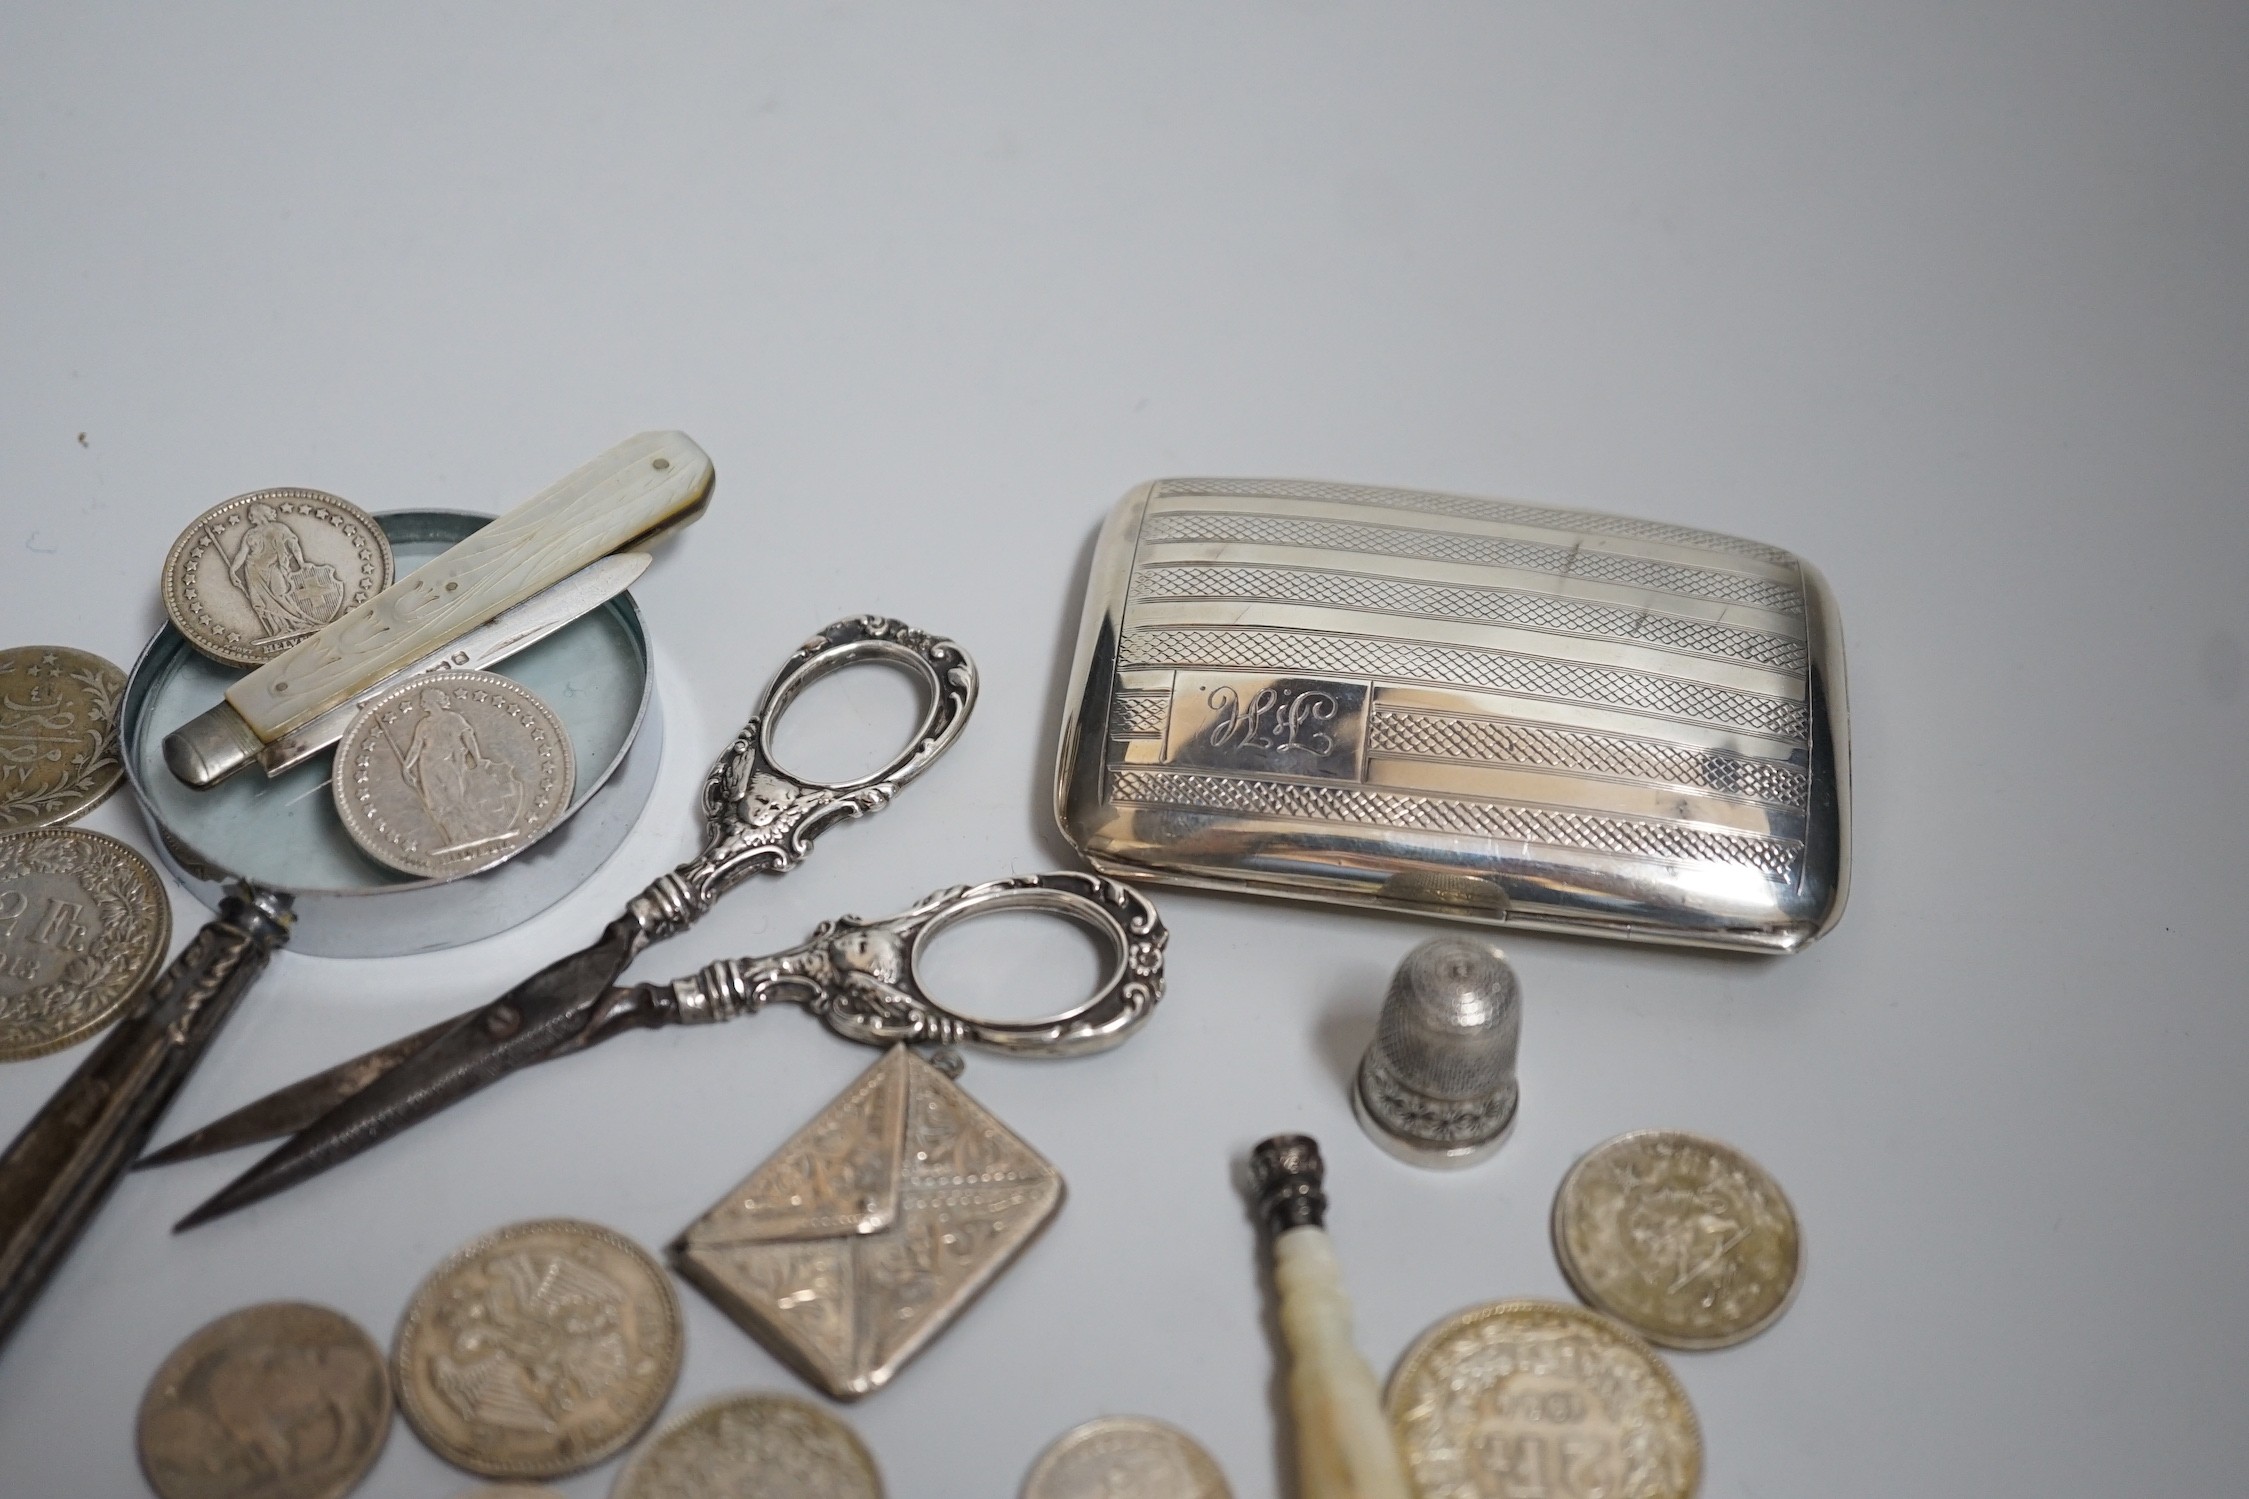 Miscellaneous small silver and white metal items including thimbles, a cigarette case, envelope - Image 3 of 5